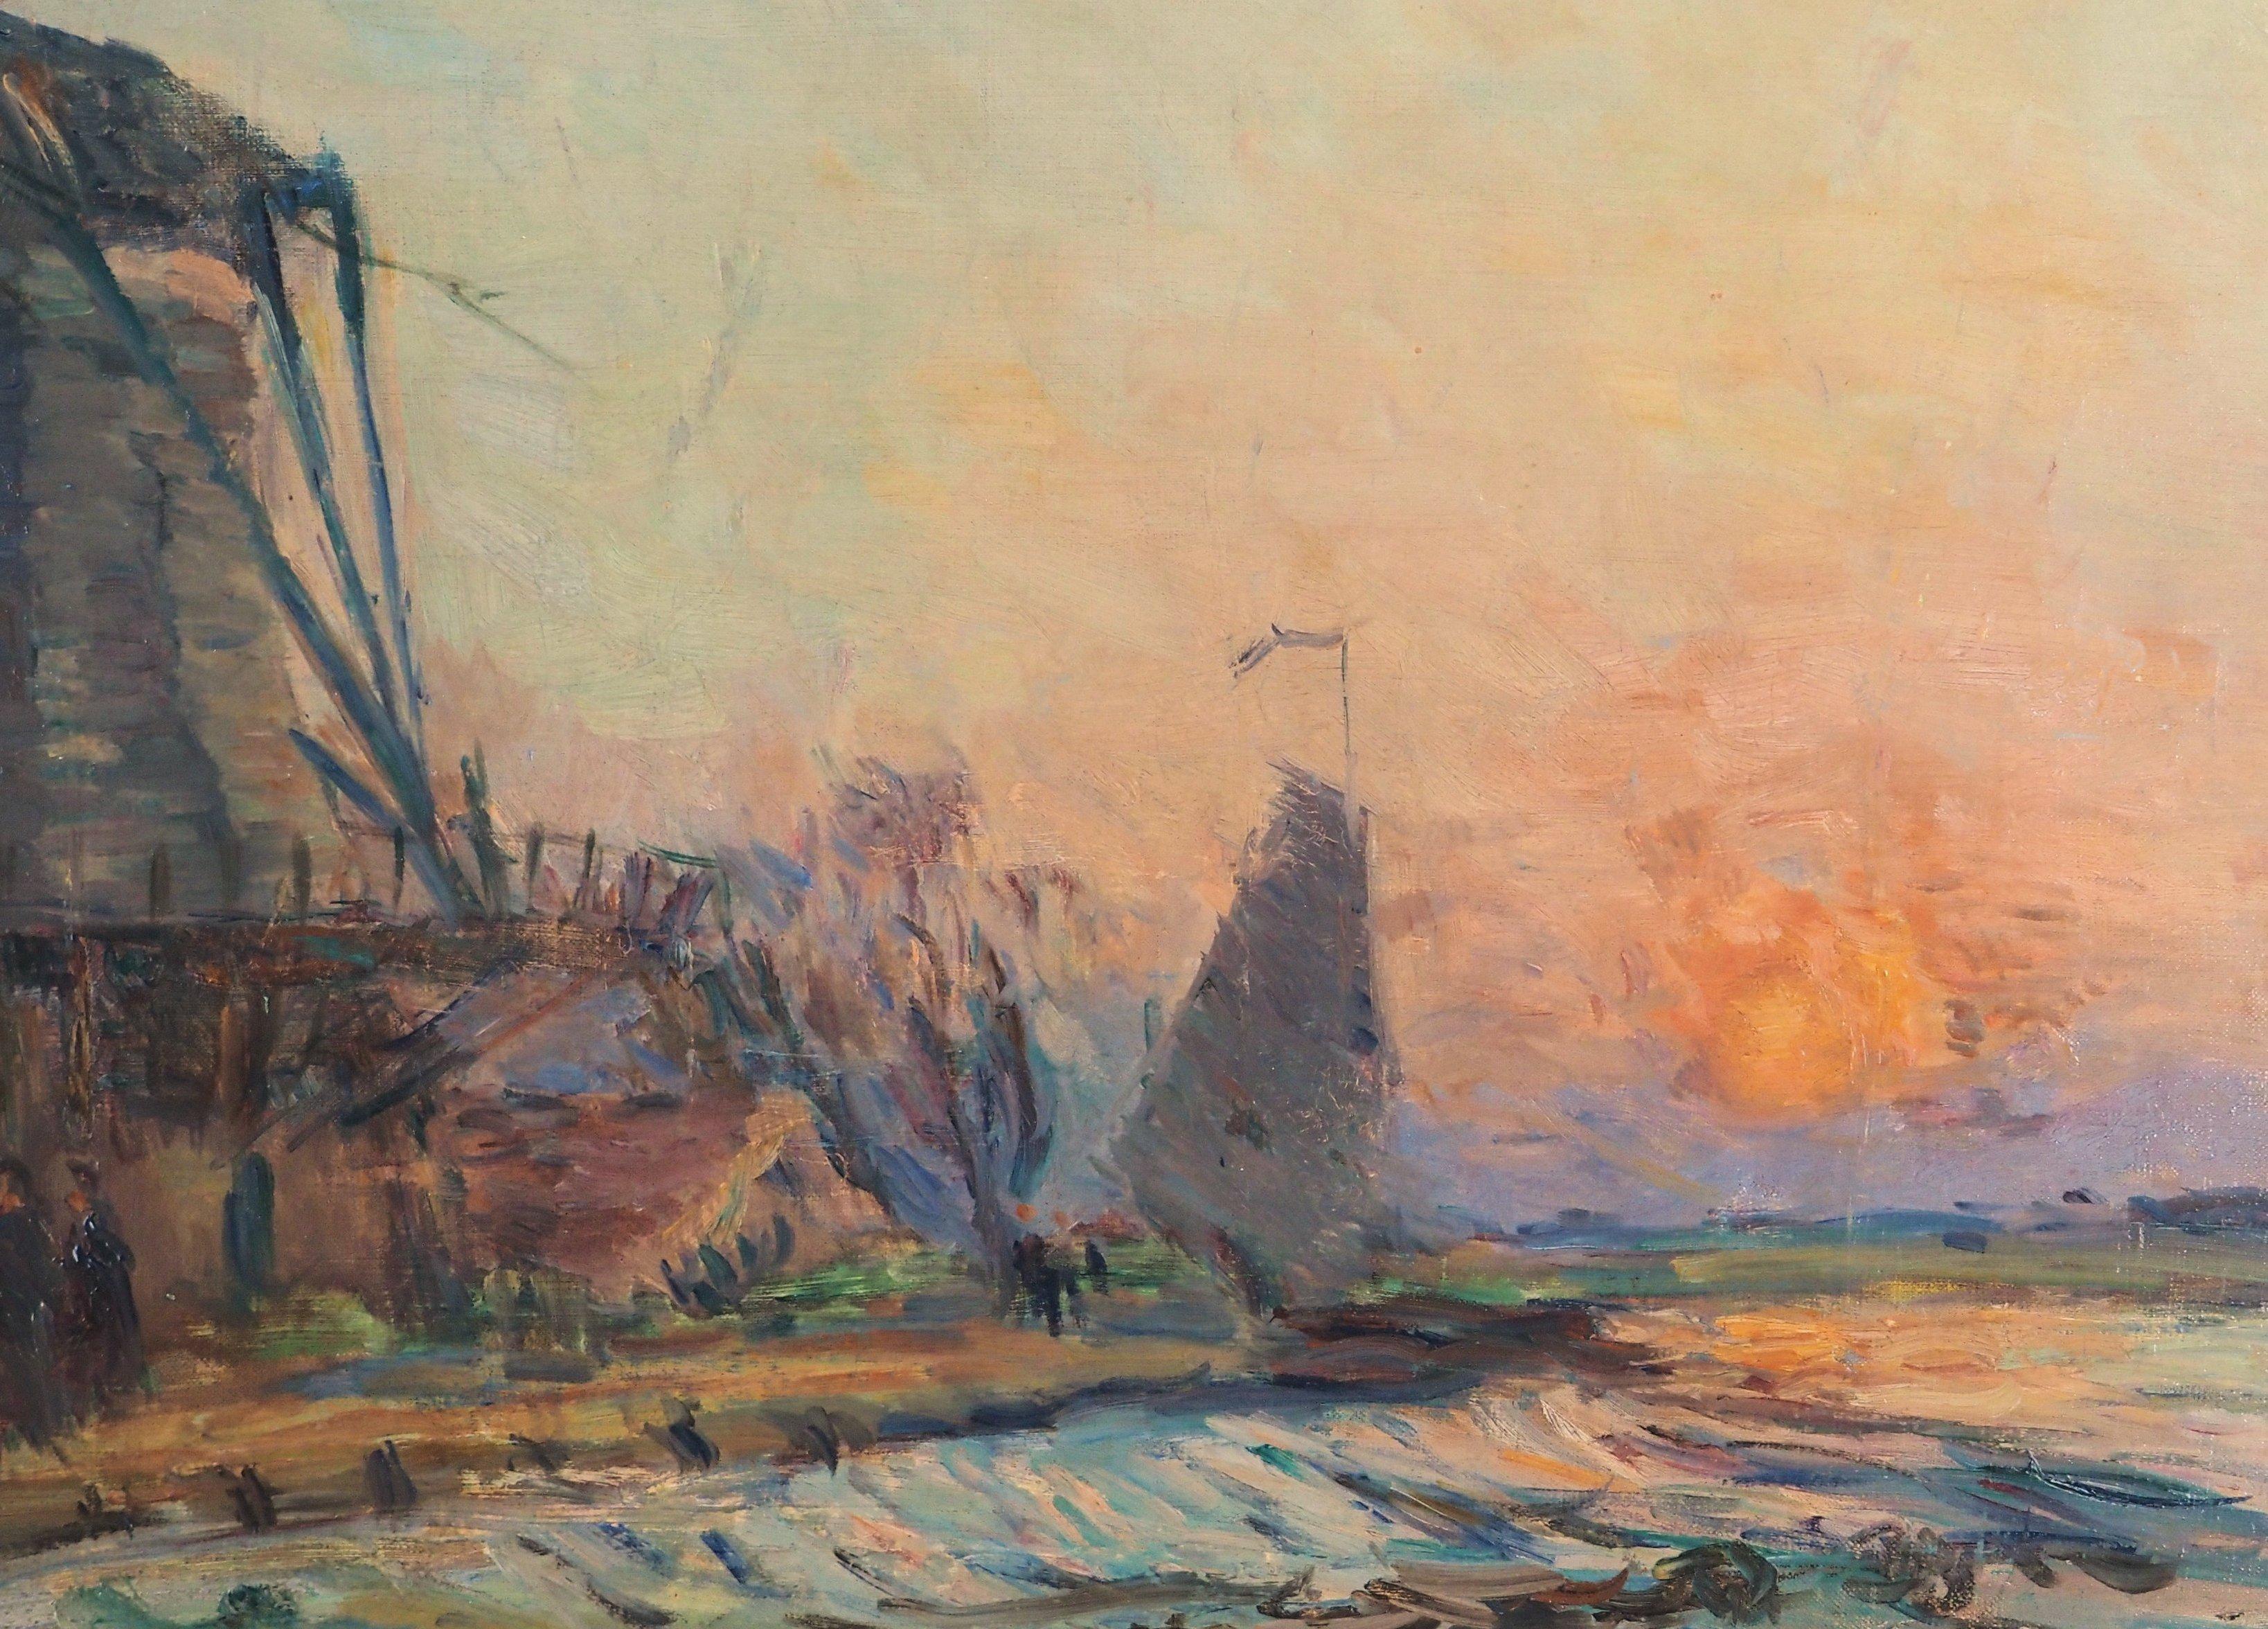 Holland : Windmill and Sunset near Rotterdam - Original Oil on Canvas, Signed - Brown Landscape Painting by Albert Lebourg